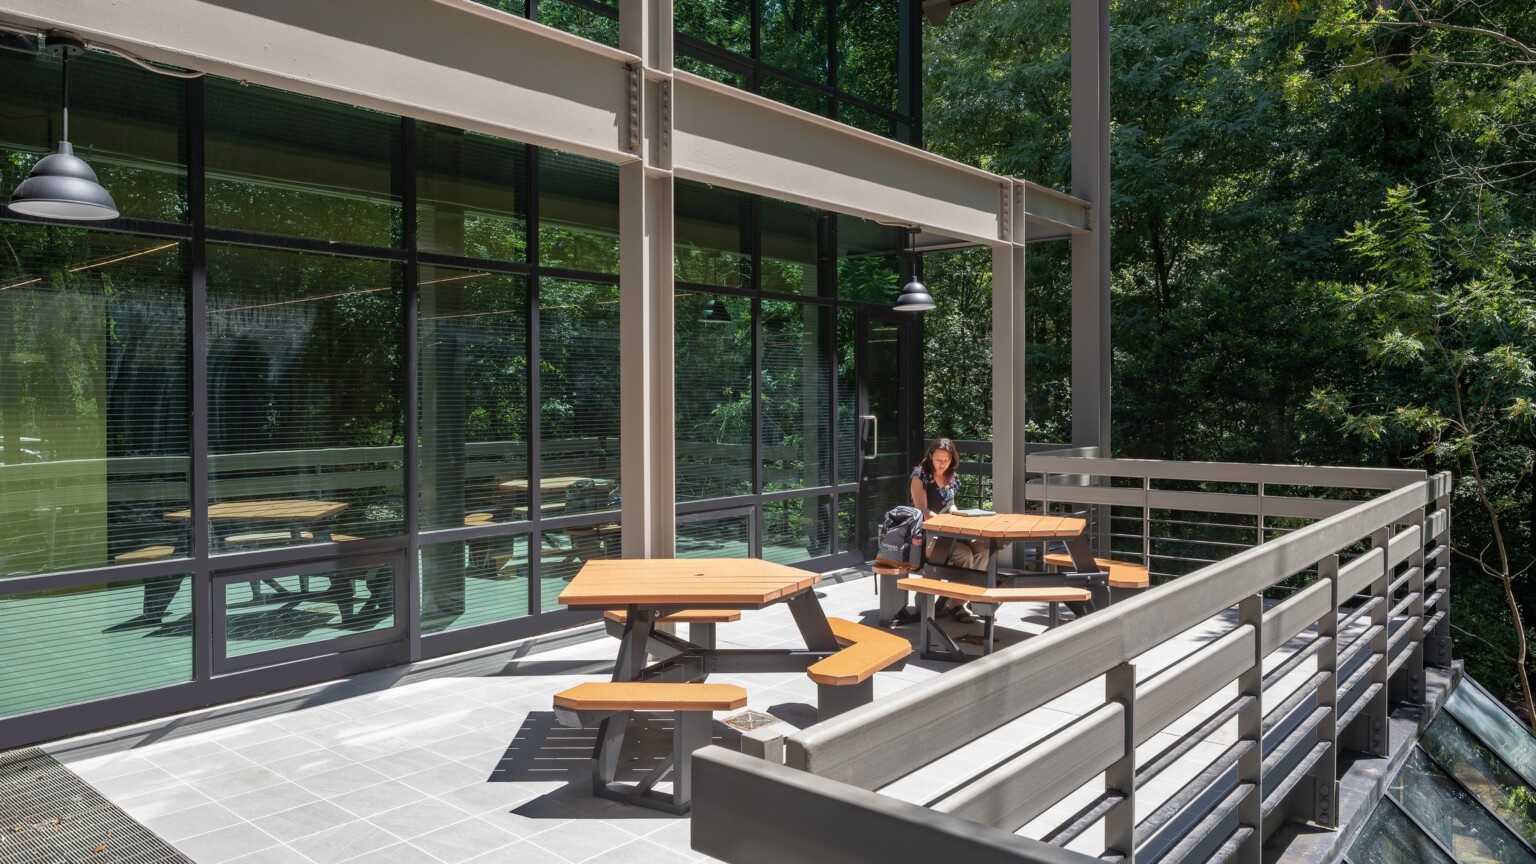 Glass building windows with brown beams and railings with picnic tables surrounded by nature